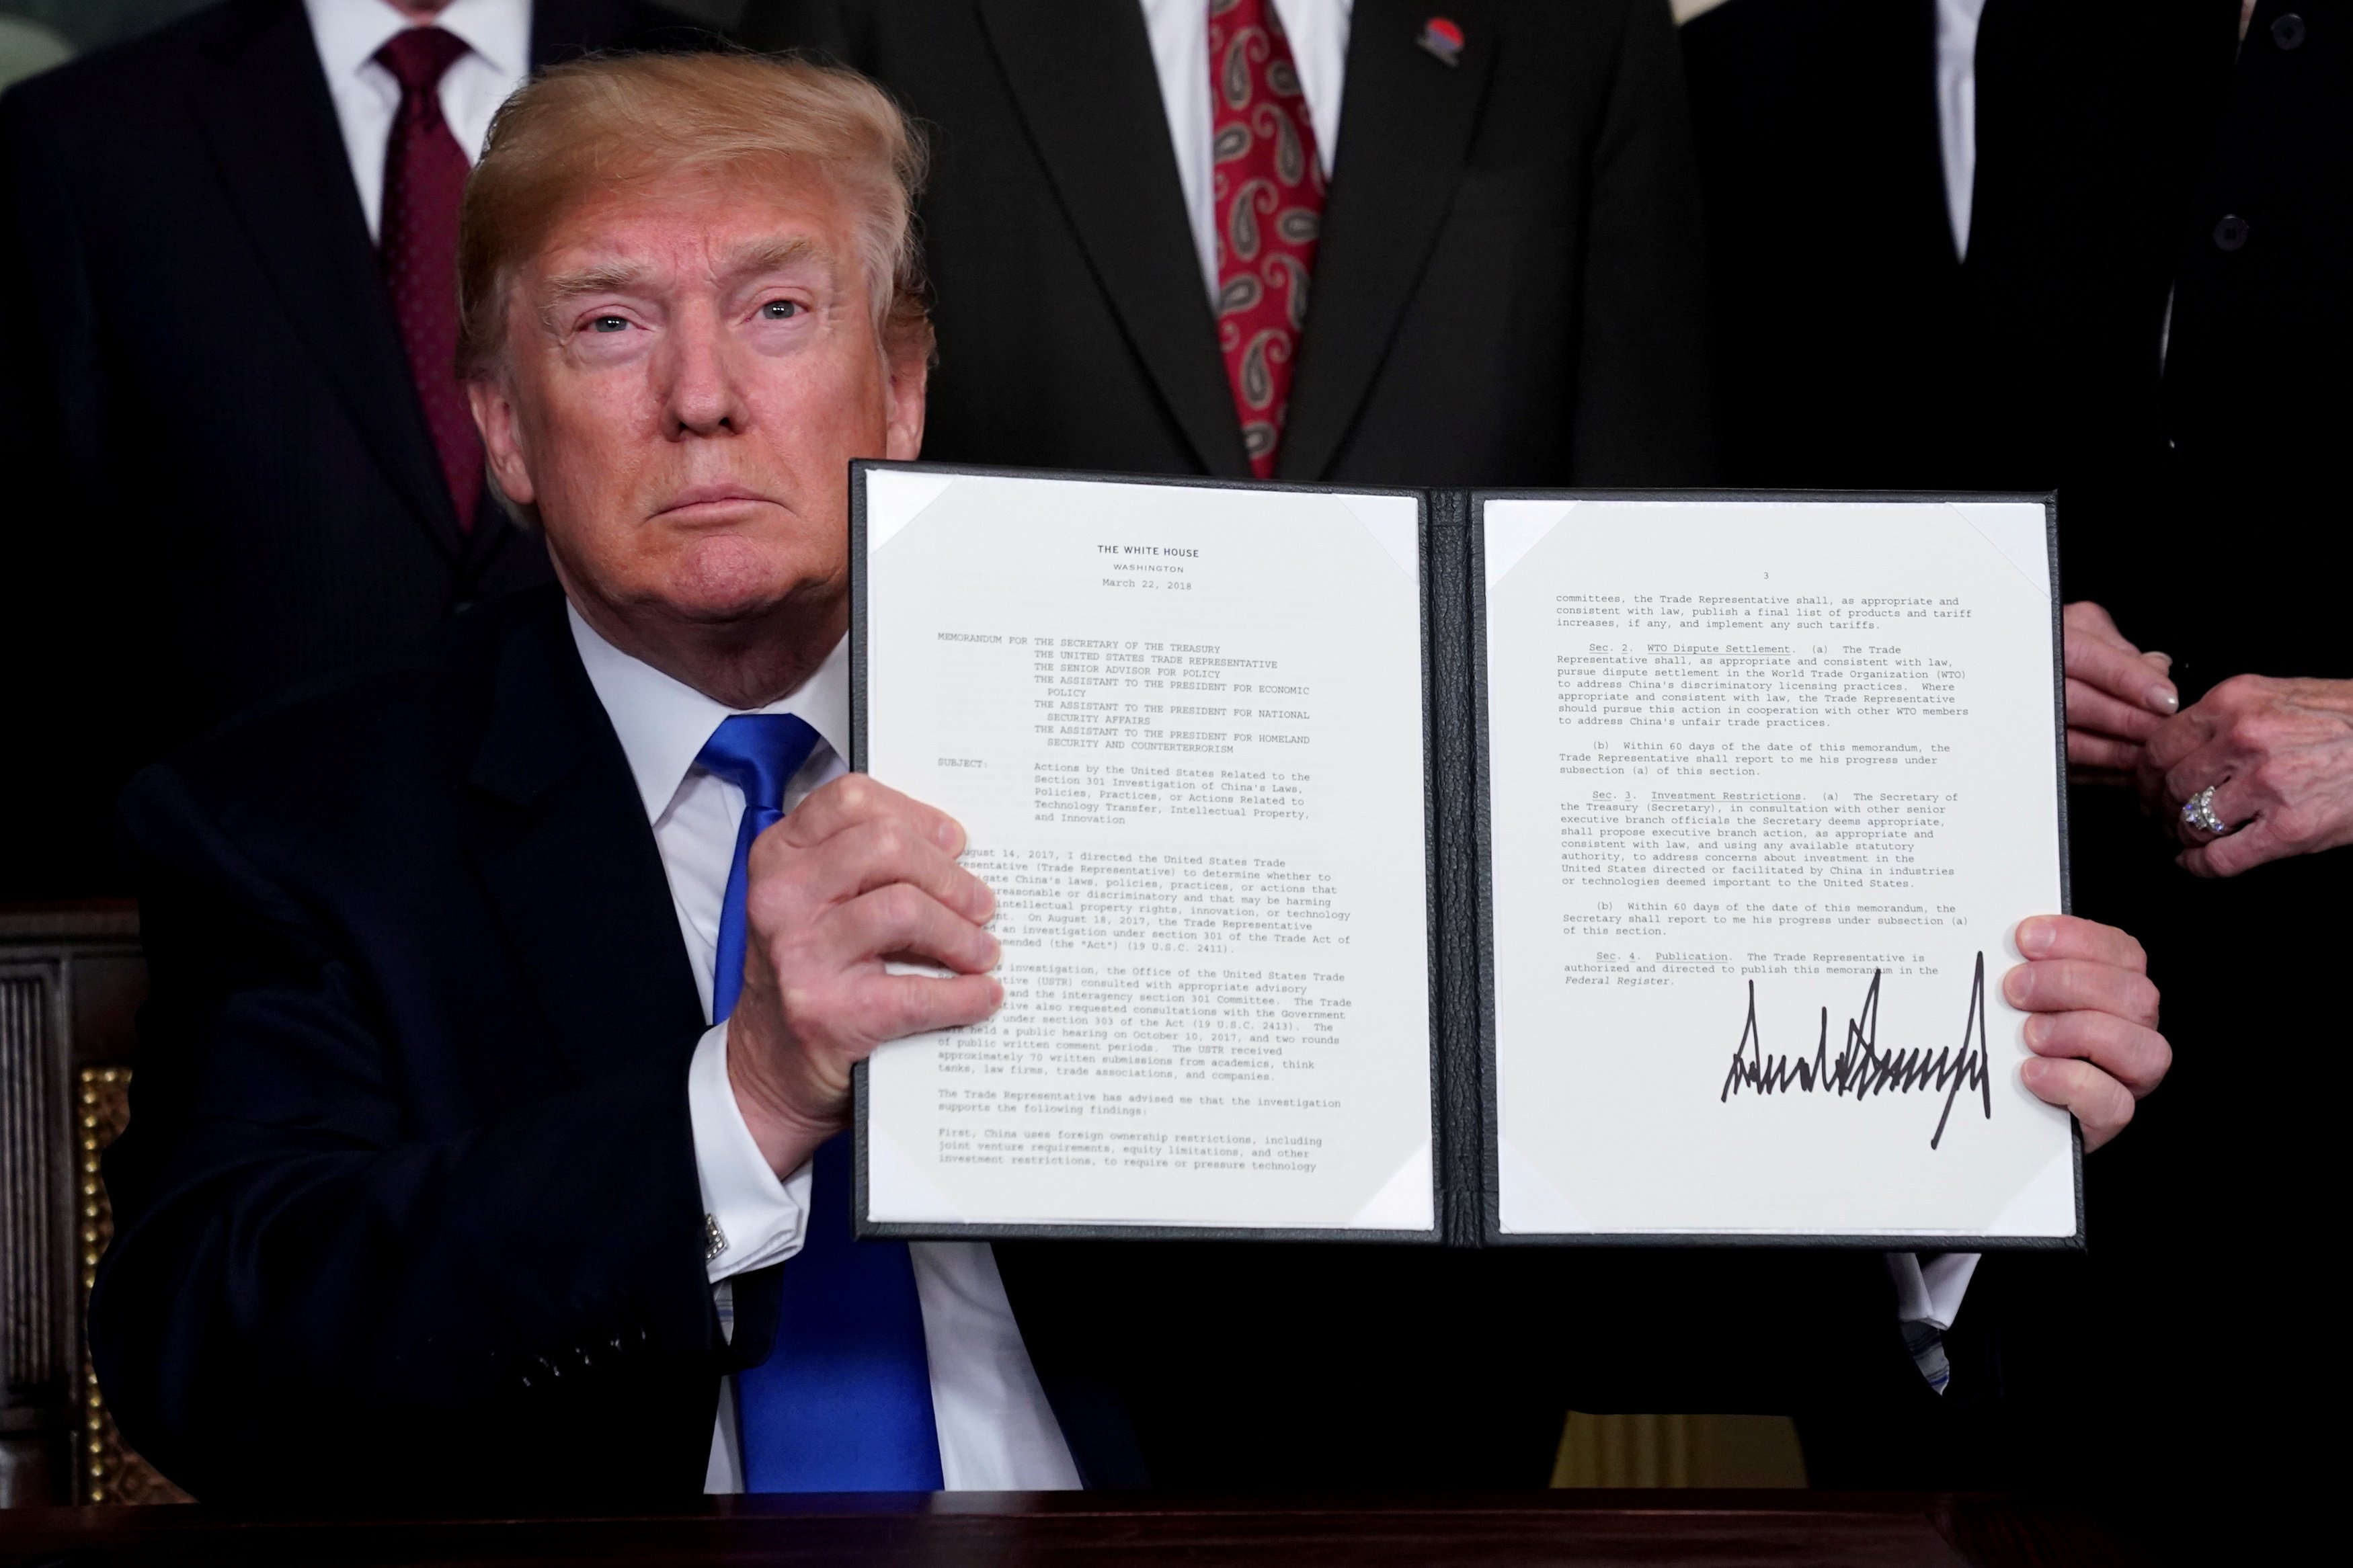 U.S. President Donald Trump holds his signed memorandum on intellectual property tariffs on high-tech goods from China, at the White House in Washington, U.S. March 22, 2018. REUTERS/Jonathan Ernst